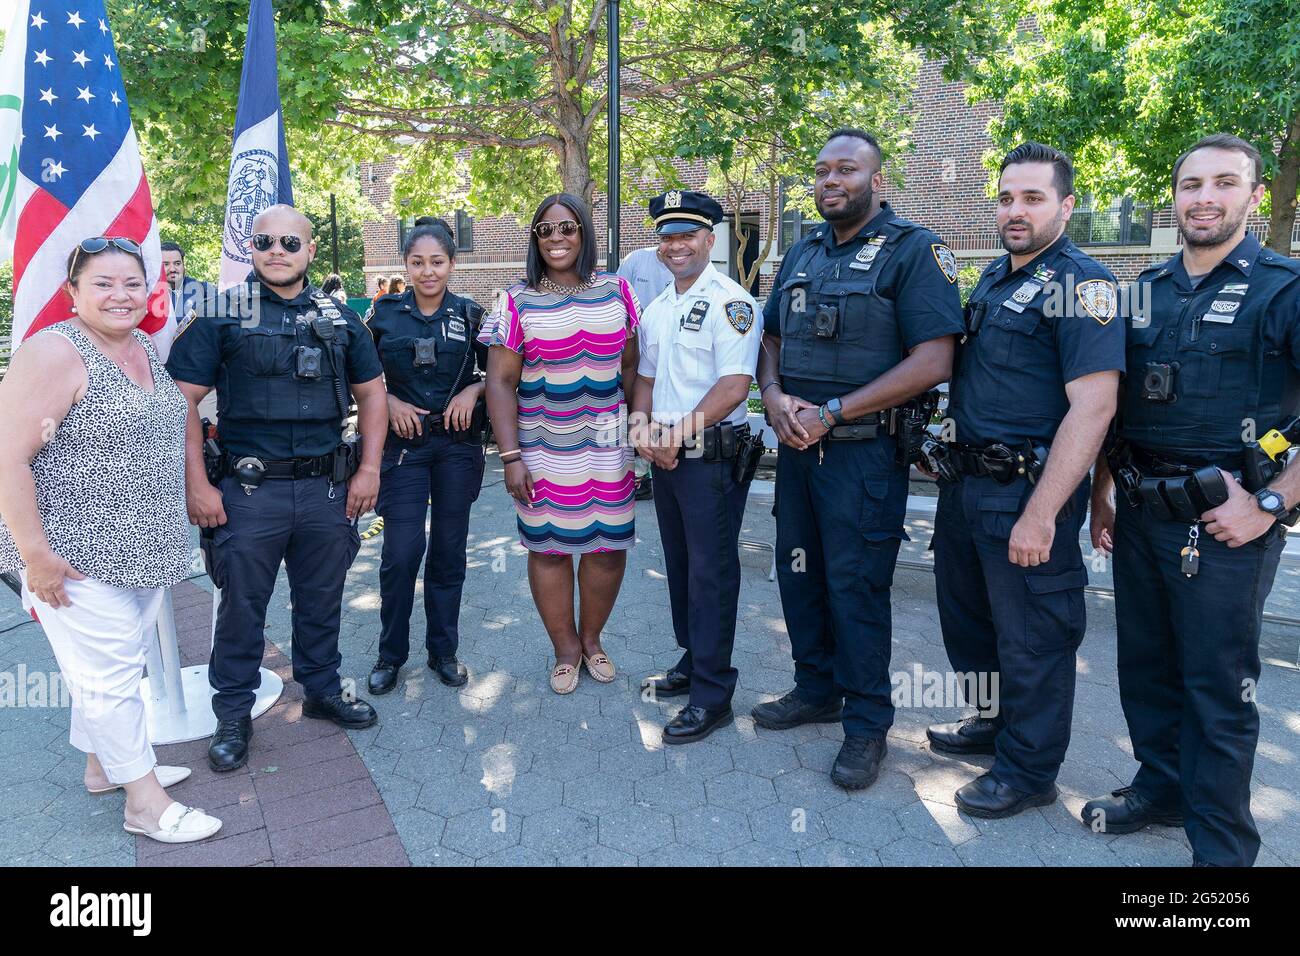 New York, United States. 24th June, 2021. Police officers from 44th precinct  and Bronx Parks Commissioner Iris Rodriguez-Rosa (L) and City Council  Member Vanessa Gibson (4th from left) attended NYC Parks, Garden